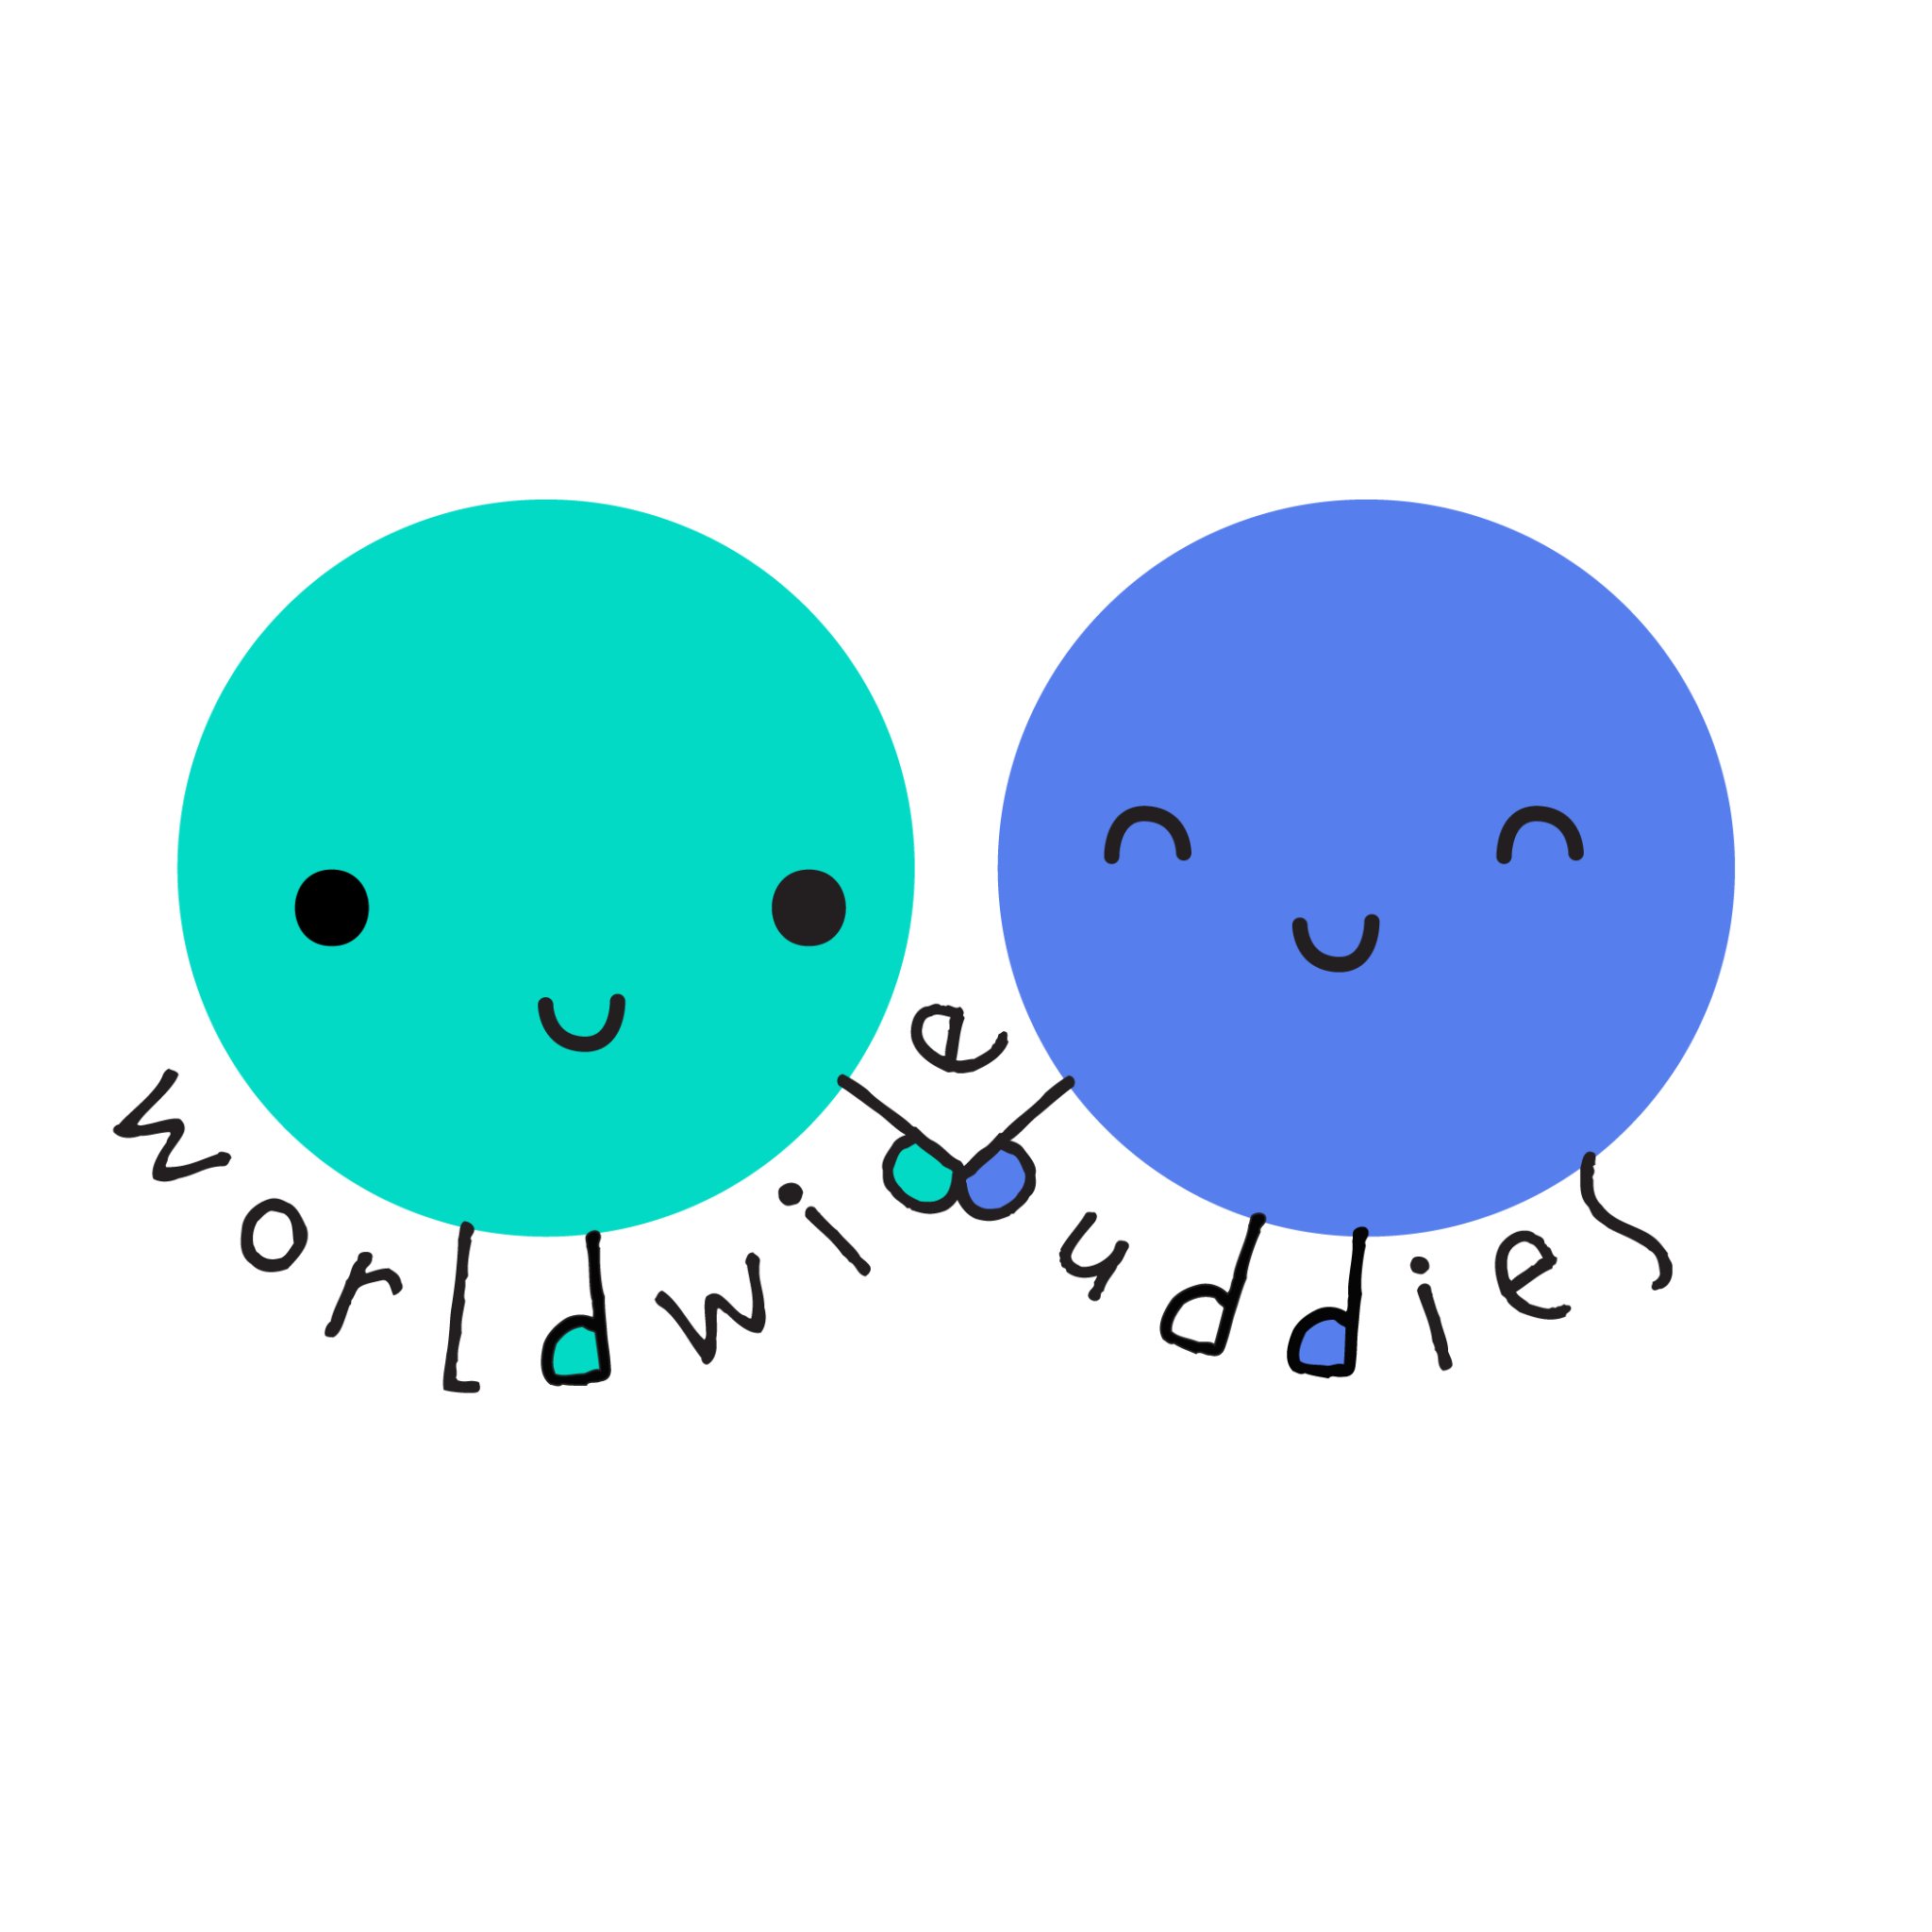 Hello world! We are Worldwide Buddies, stories and toys that let children imagine a more beautifully complex world. Put a smile on your little one's face: